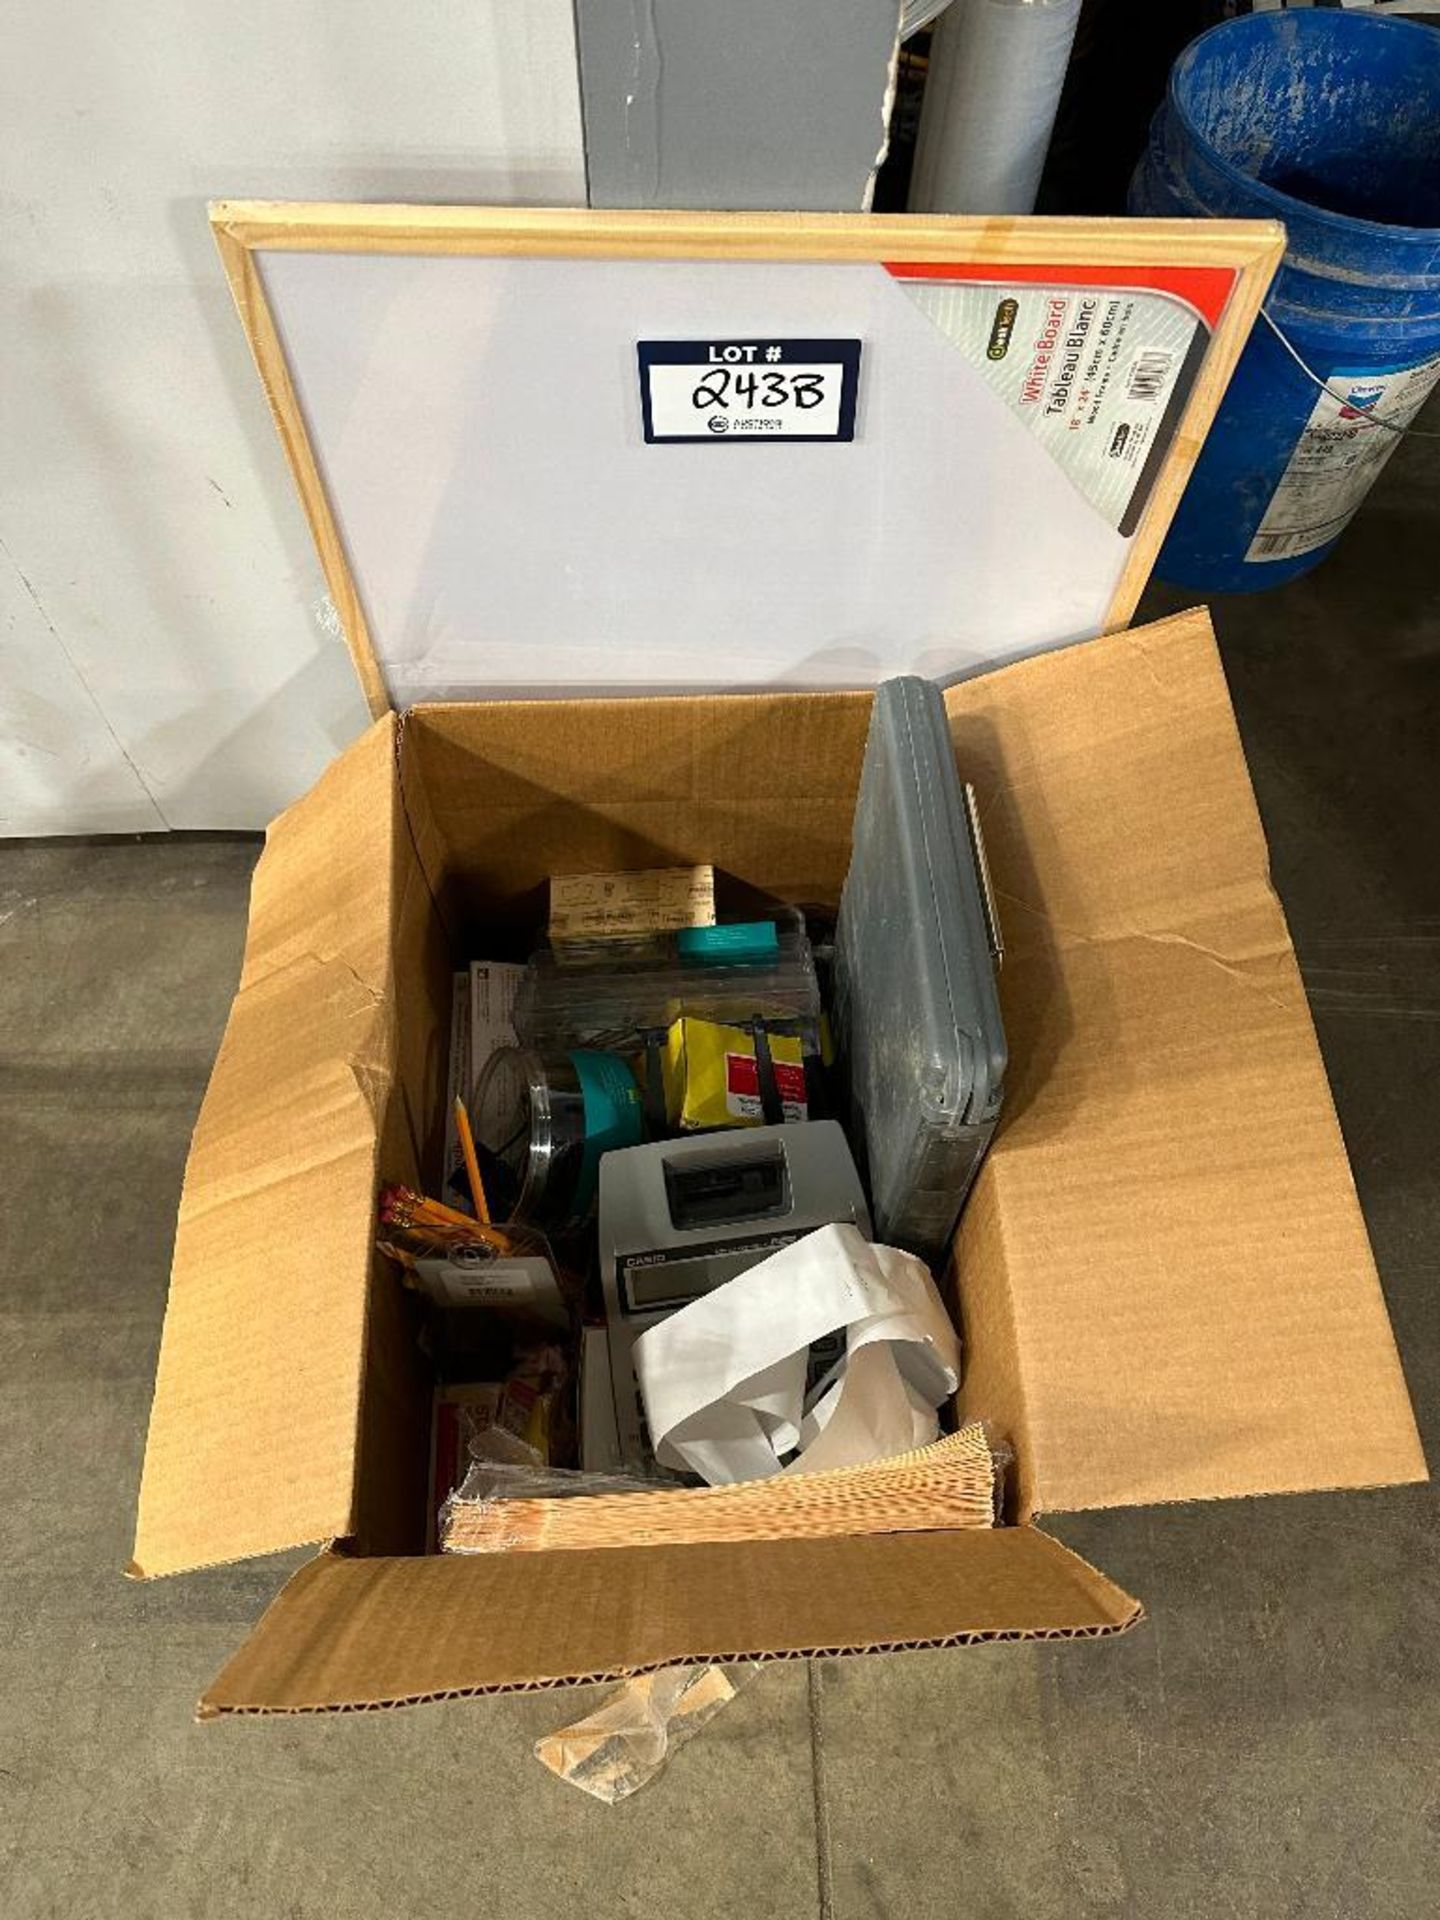 Lot of Asst. Stationary including White Board, Tape, etc.